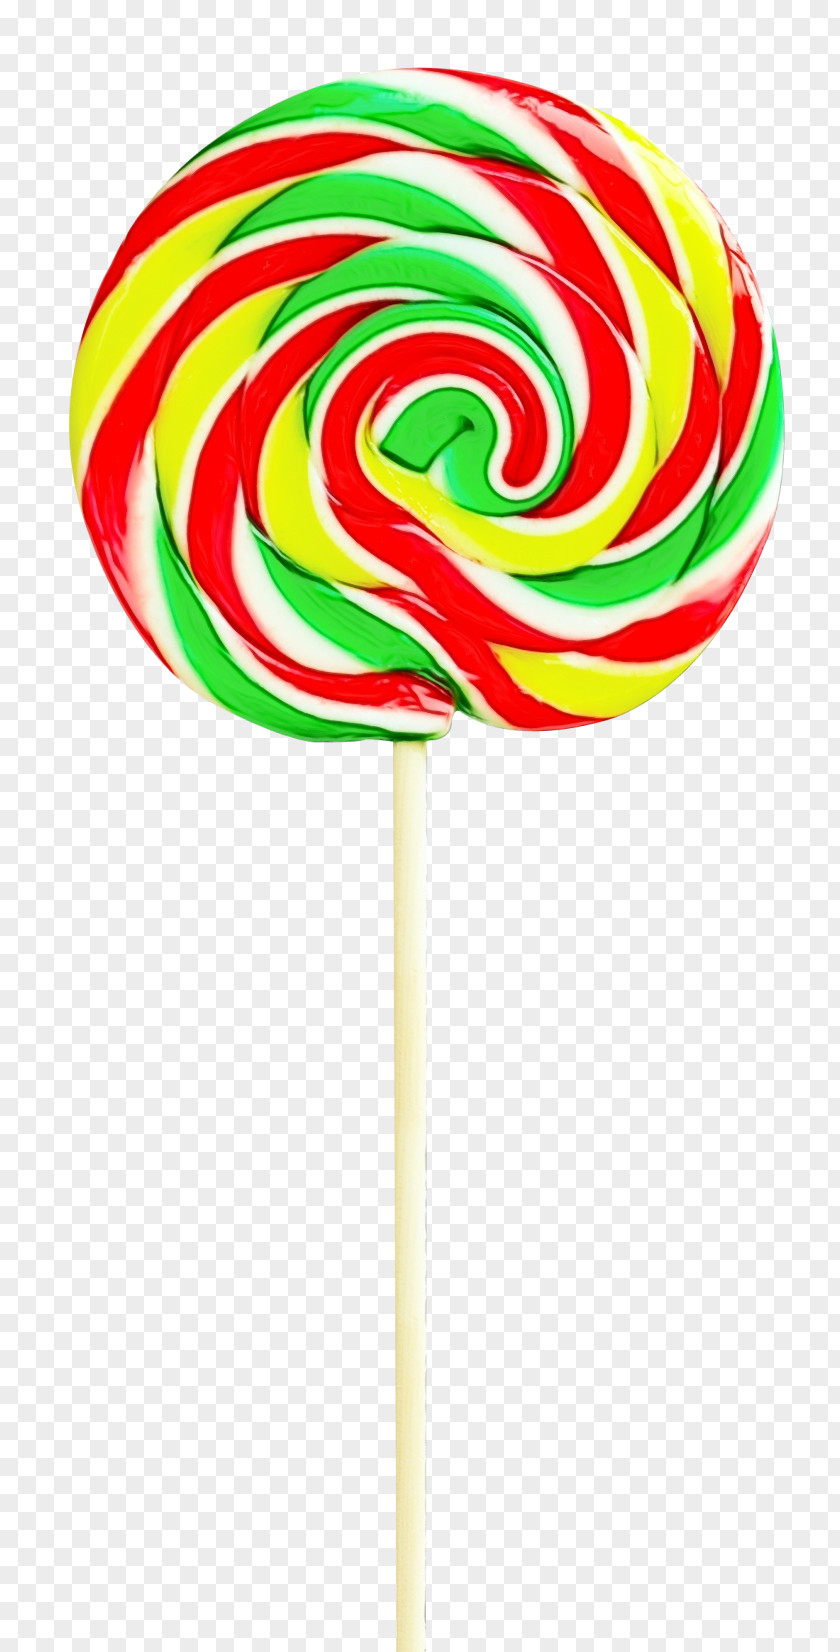 Lollipop Confectionery Candy Rock Chupa Chups PNG